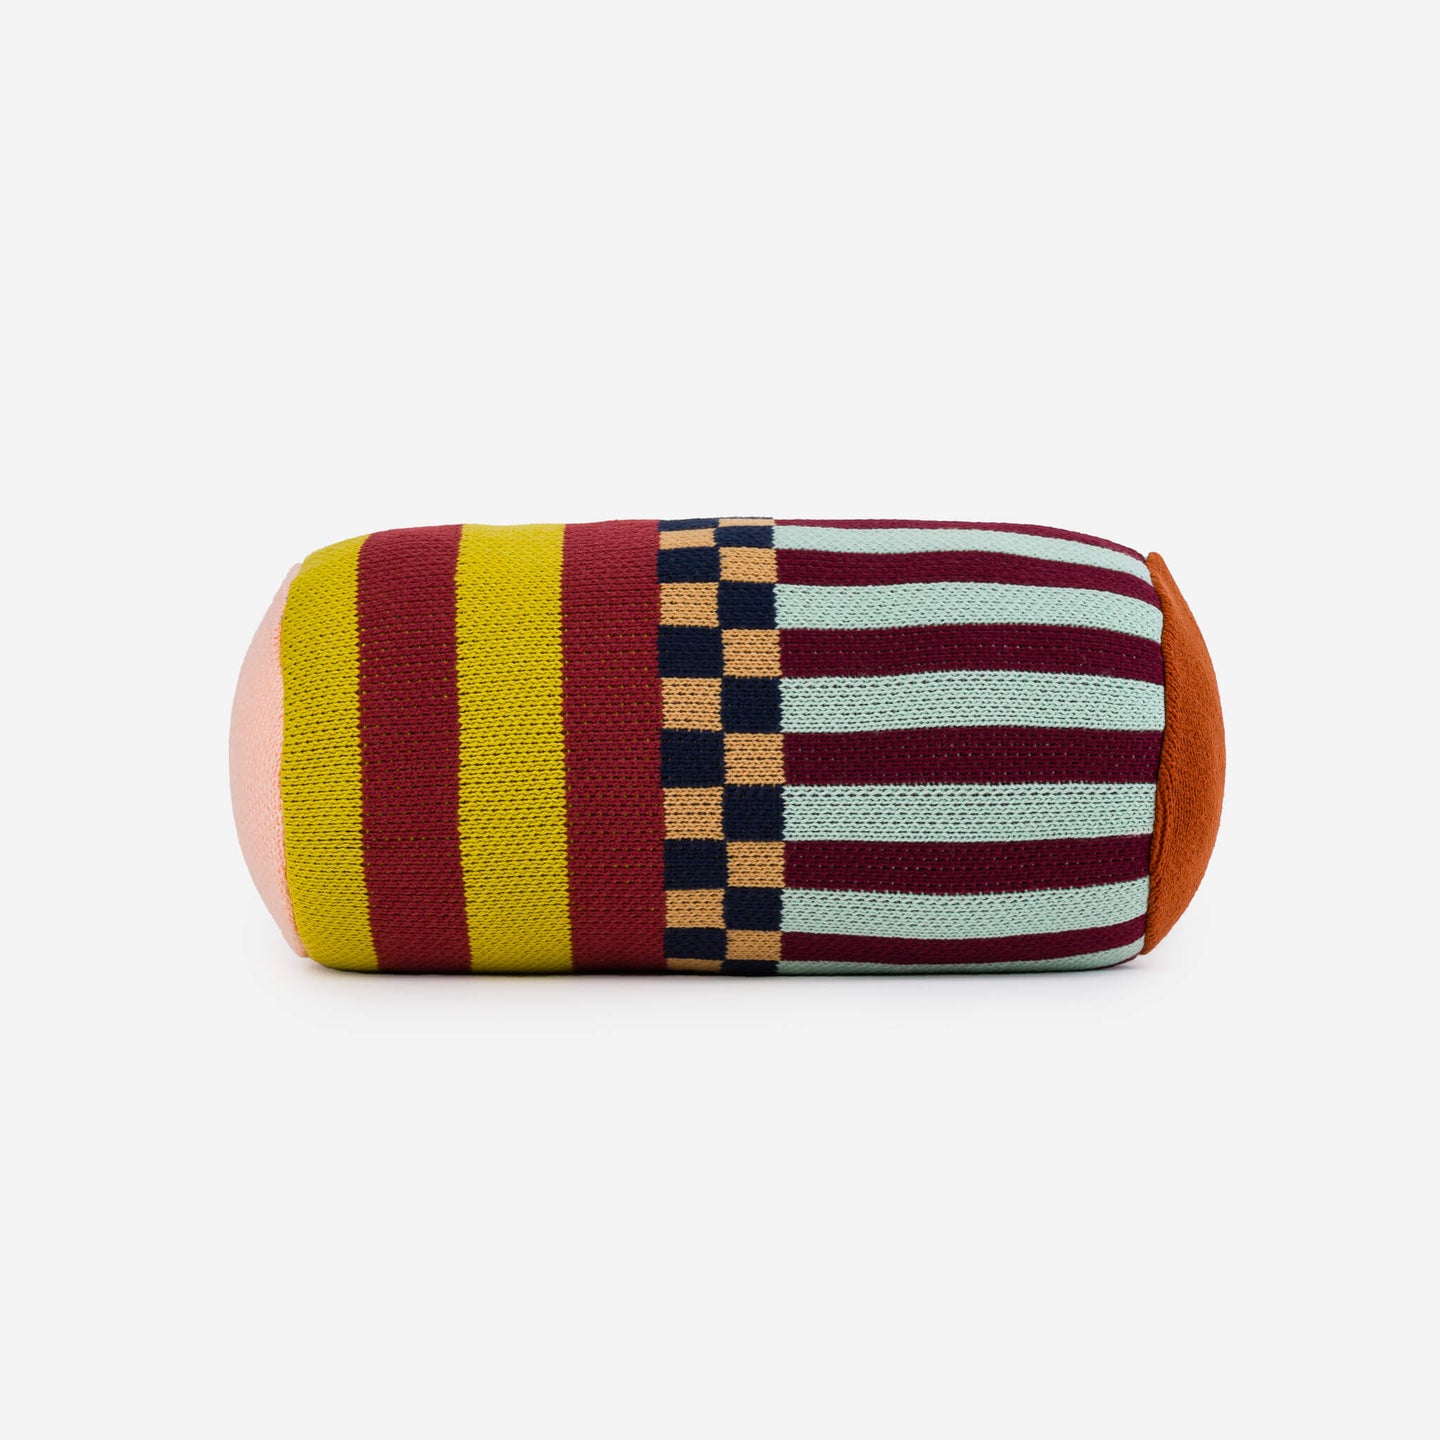 Pattern Patch Bolster Pillow Colorful Pill Shape Pillow Accent